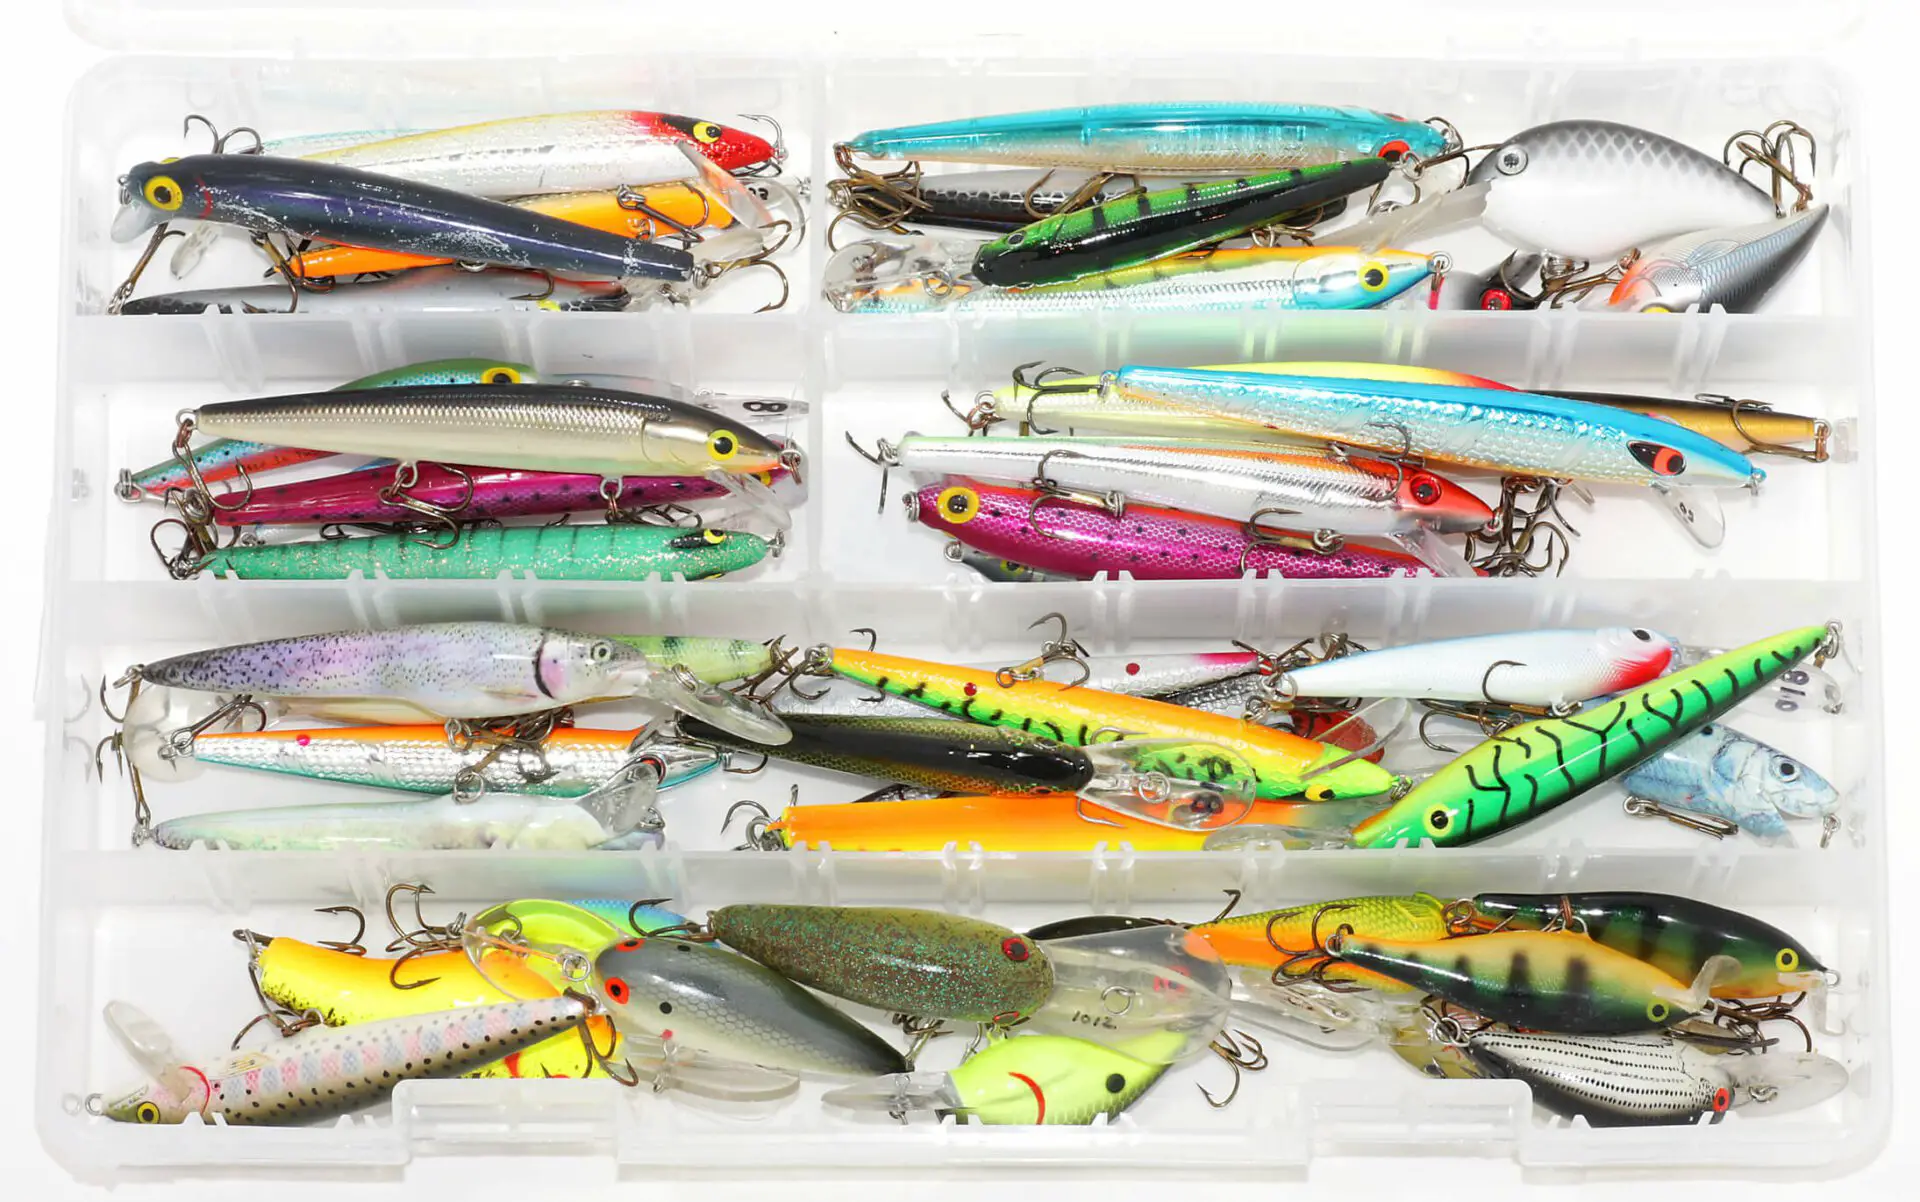 A Tackle Box full of the Best Crankbaits for Bass Fishing